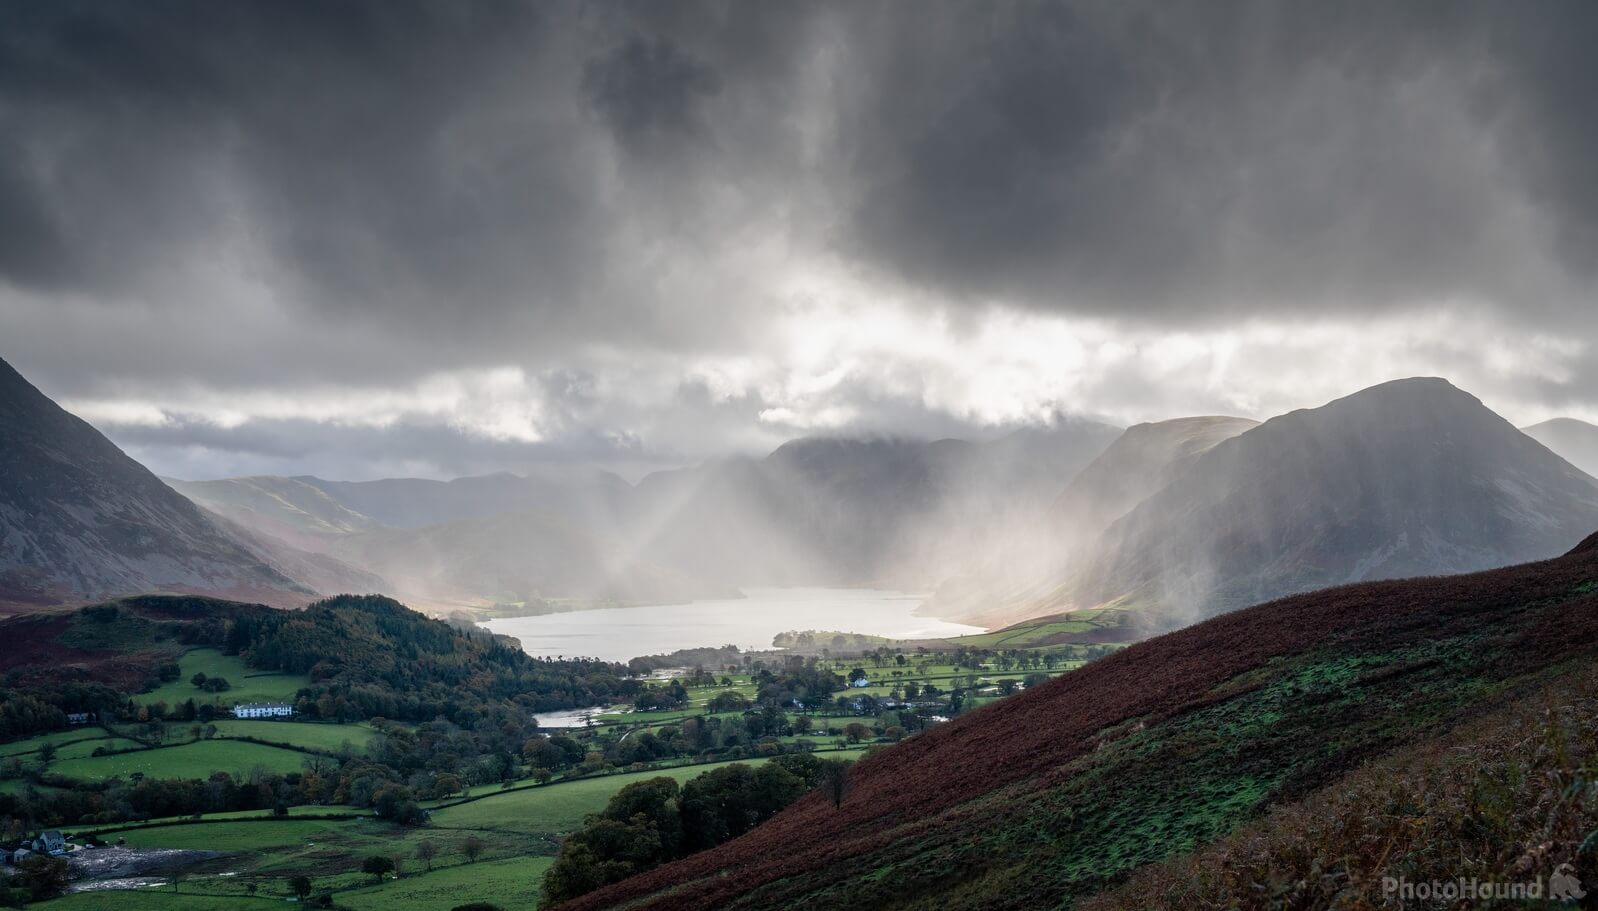 Image of Low Fell by Richard Lizzimore